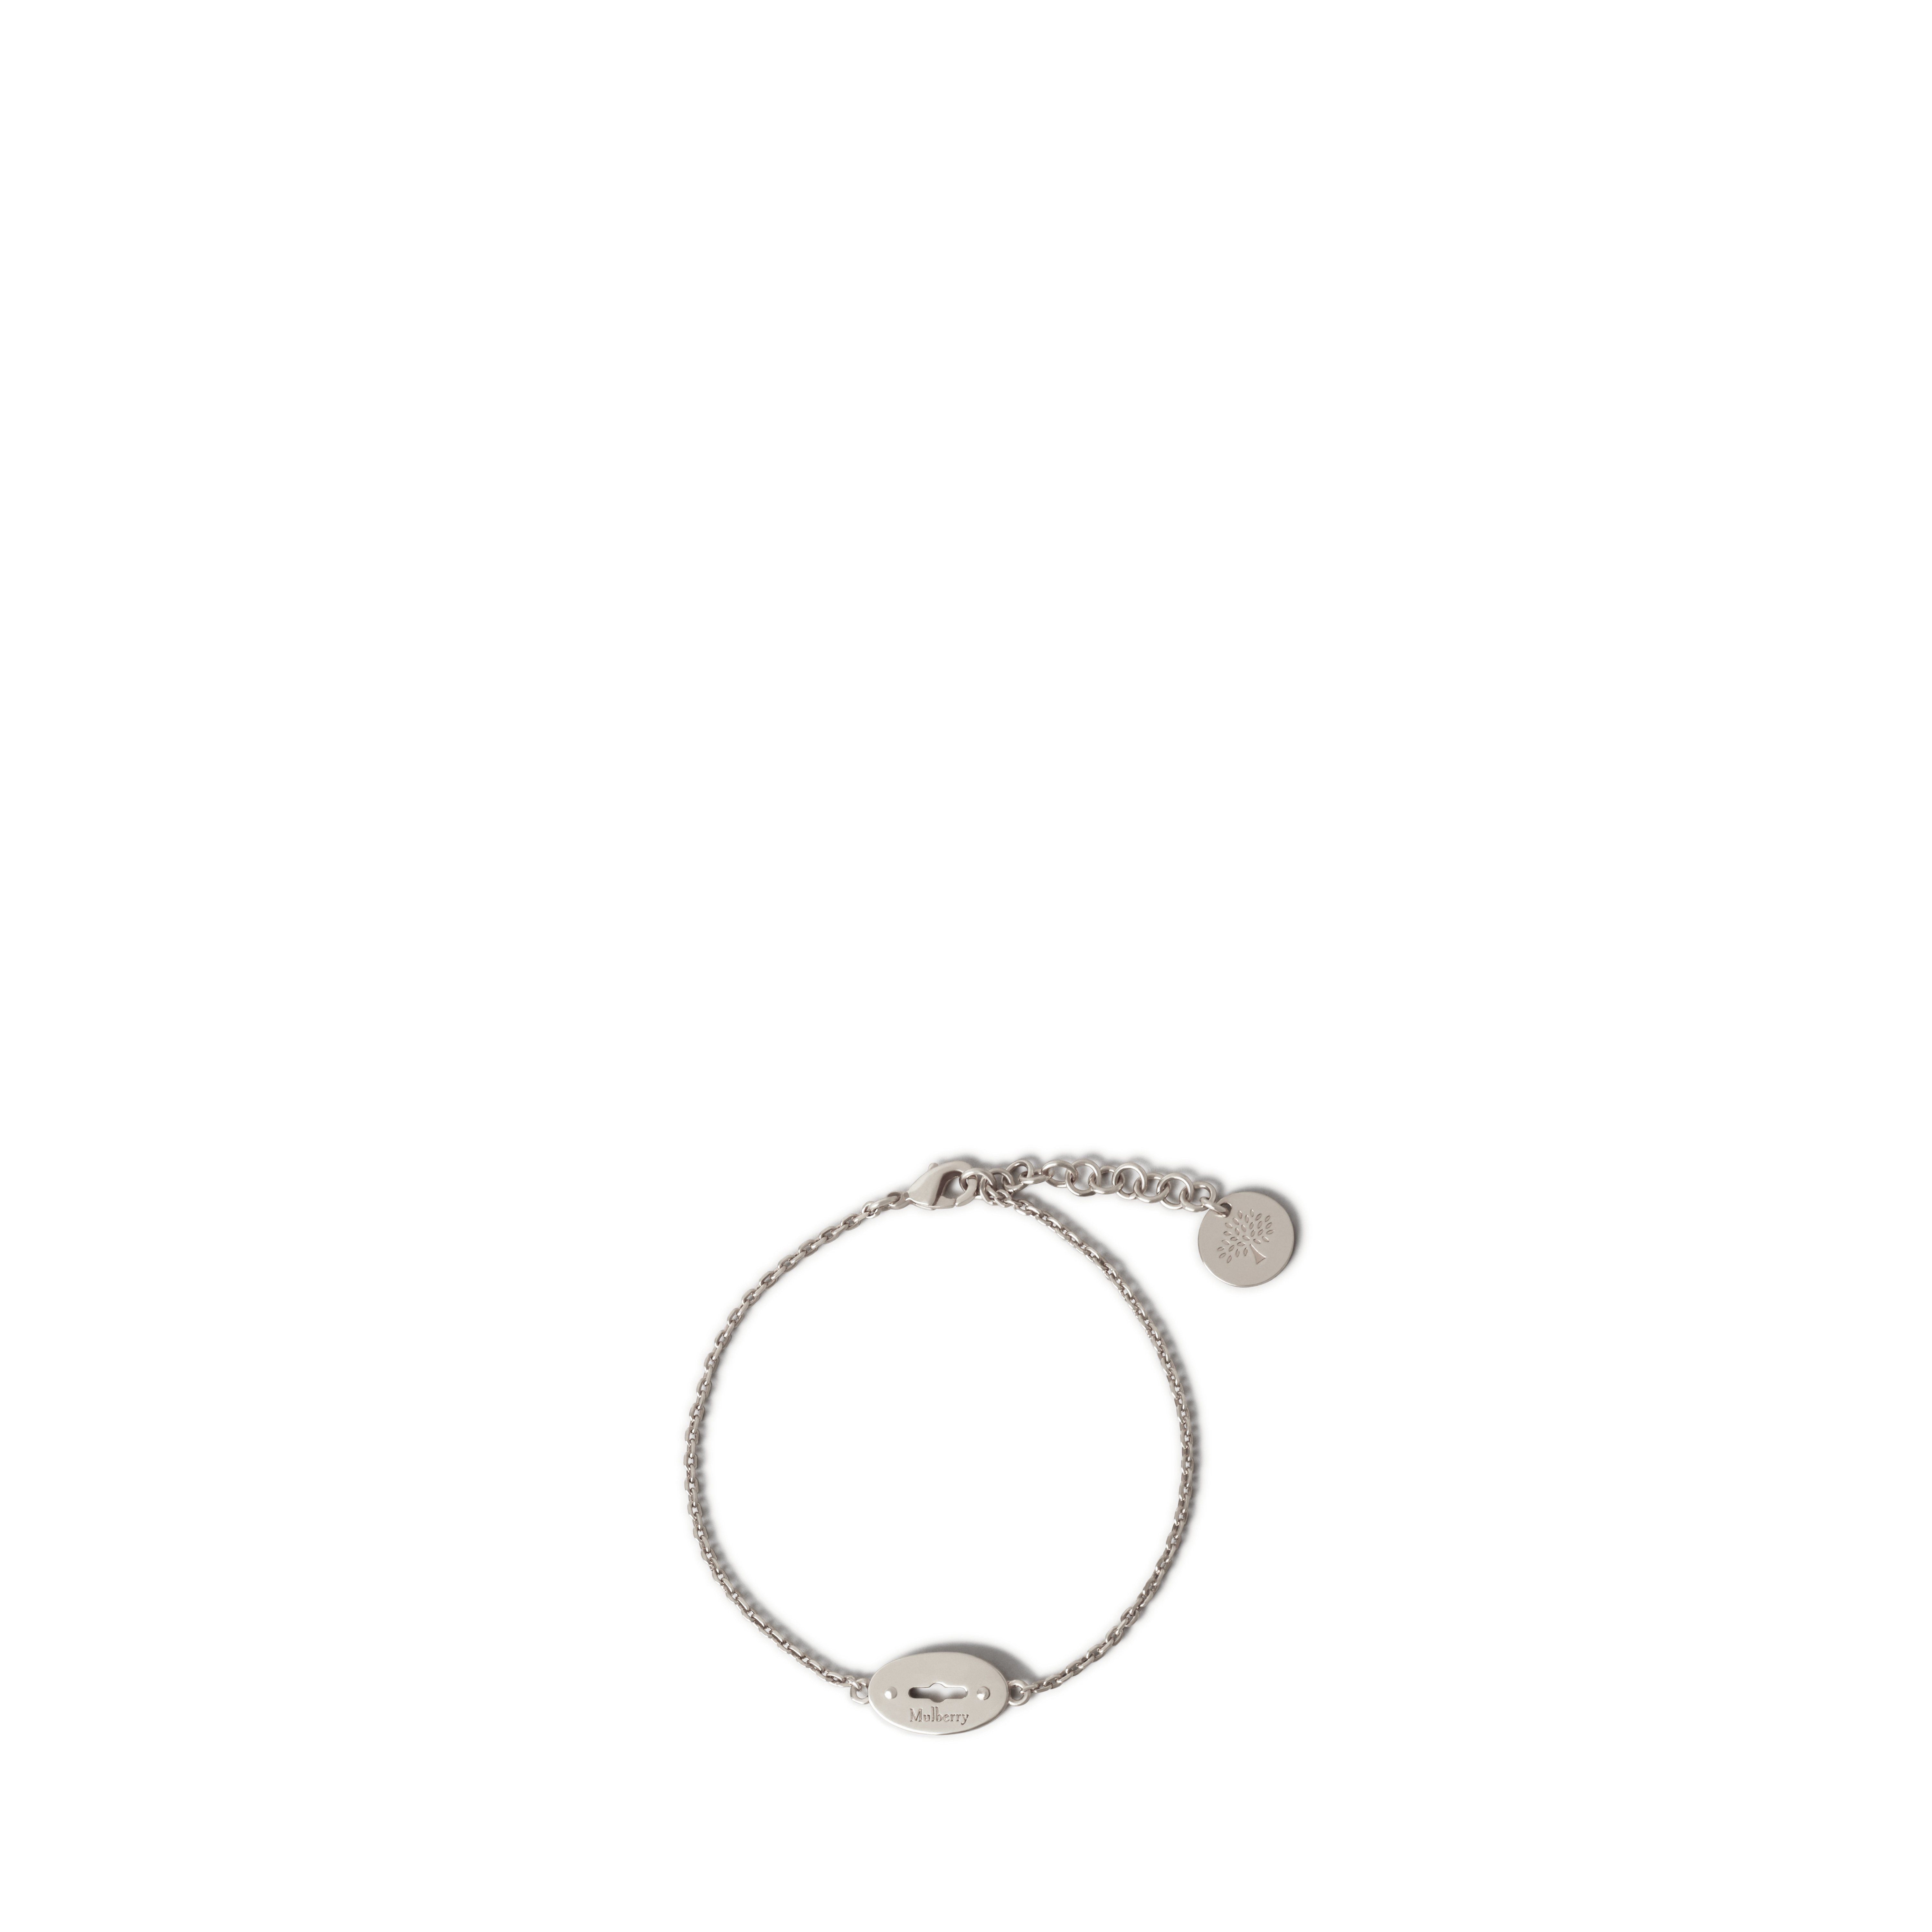 Mulberry Bayswater Bracelet In Silver